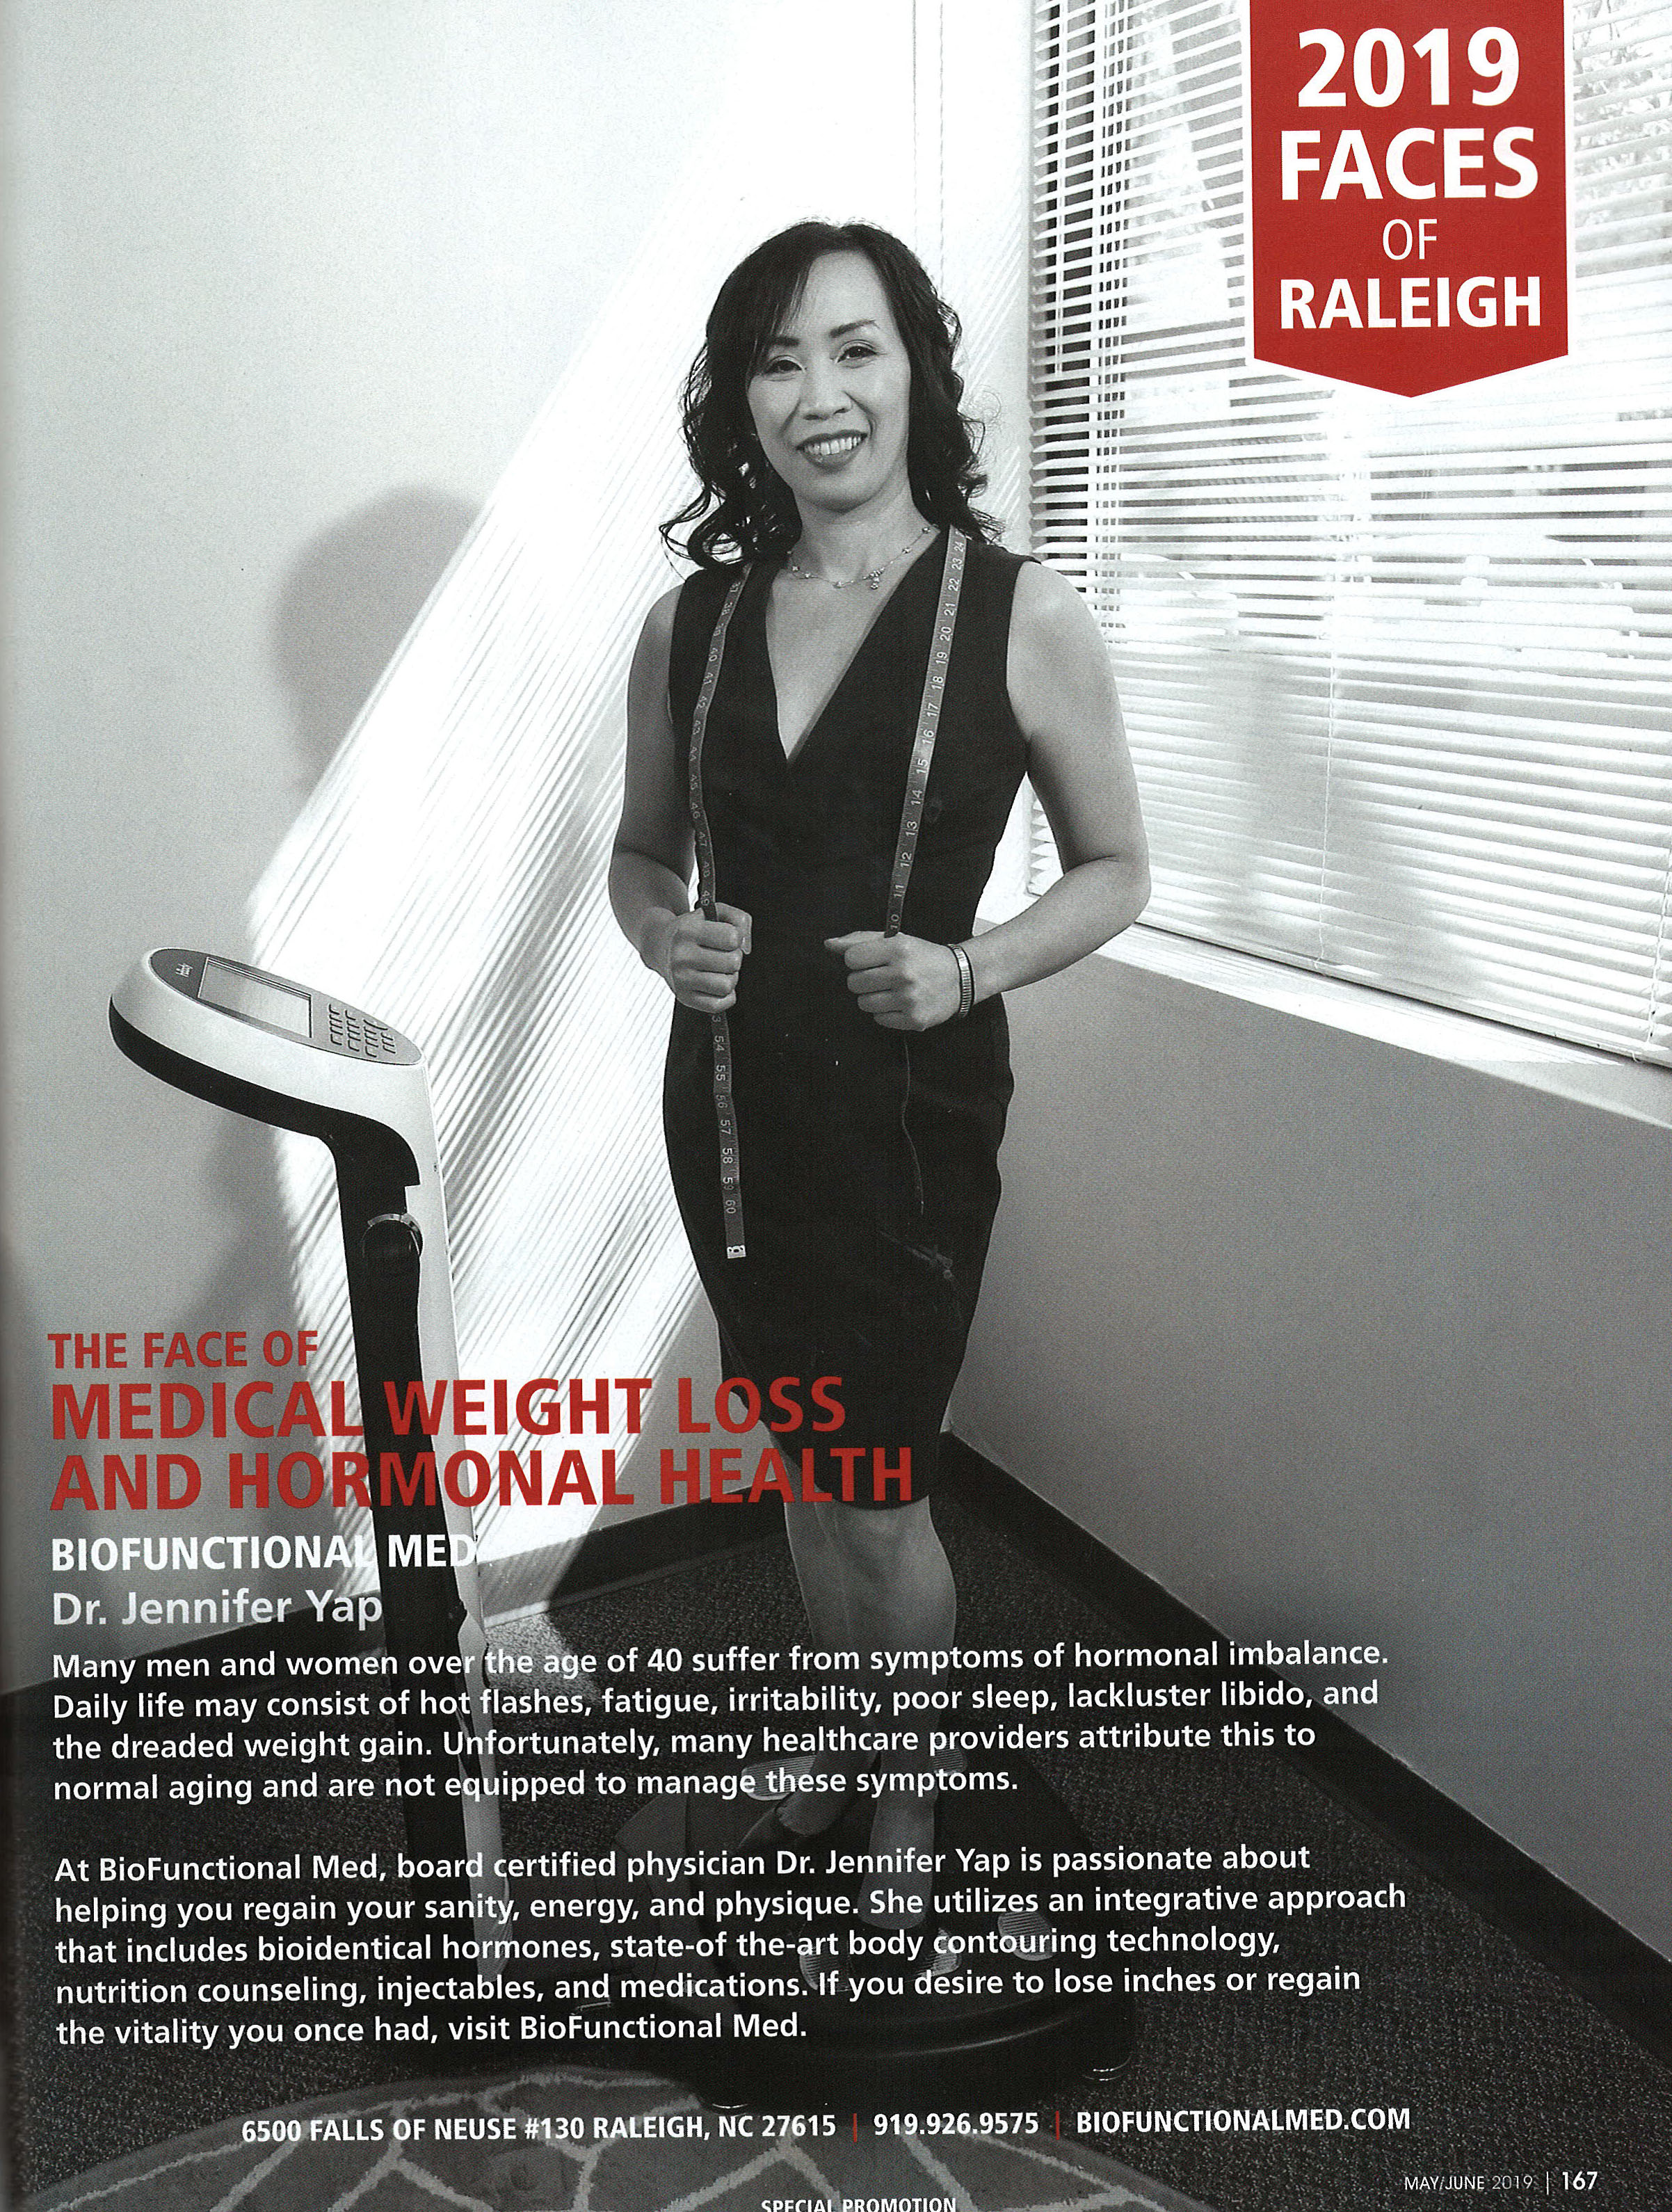 Dr Yap Recognized as Weight Loss and Hormone Specialist in Raleigh